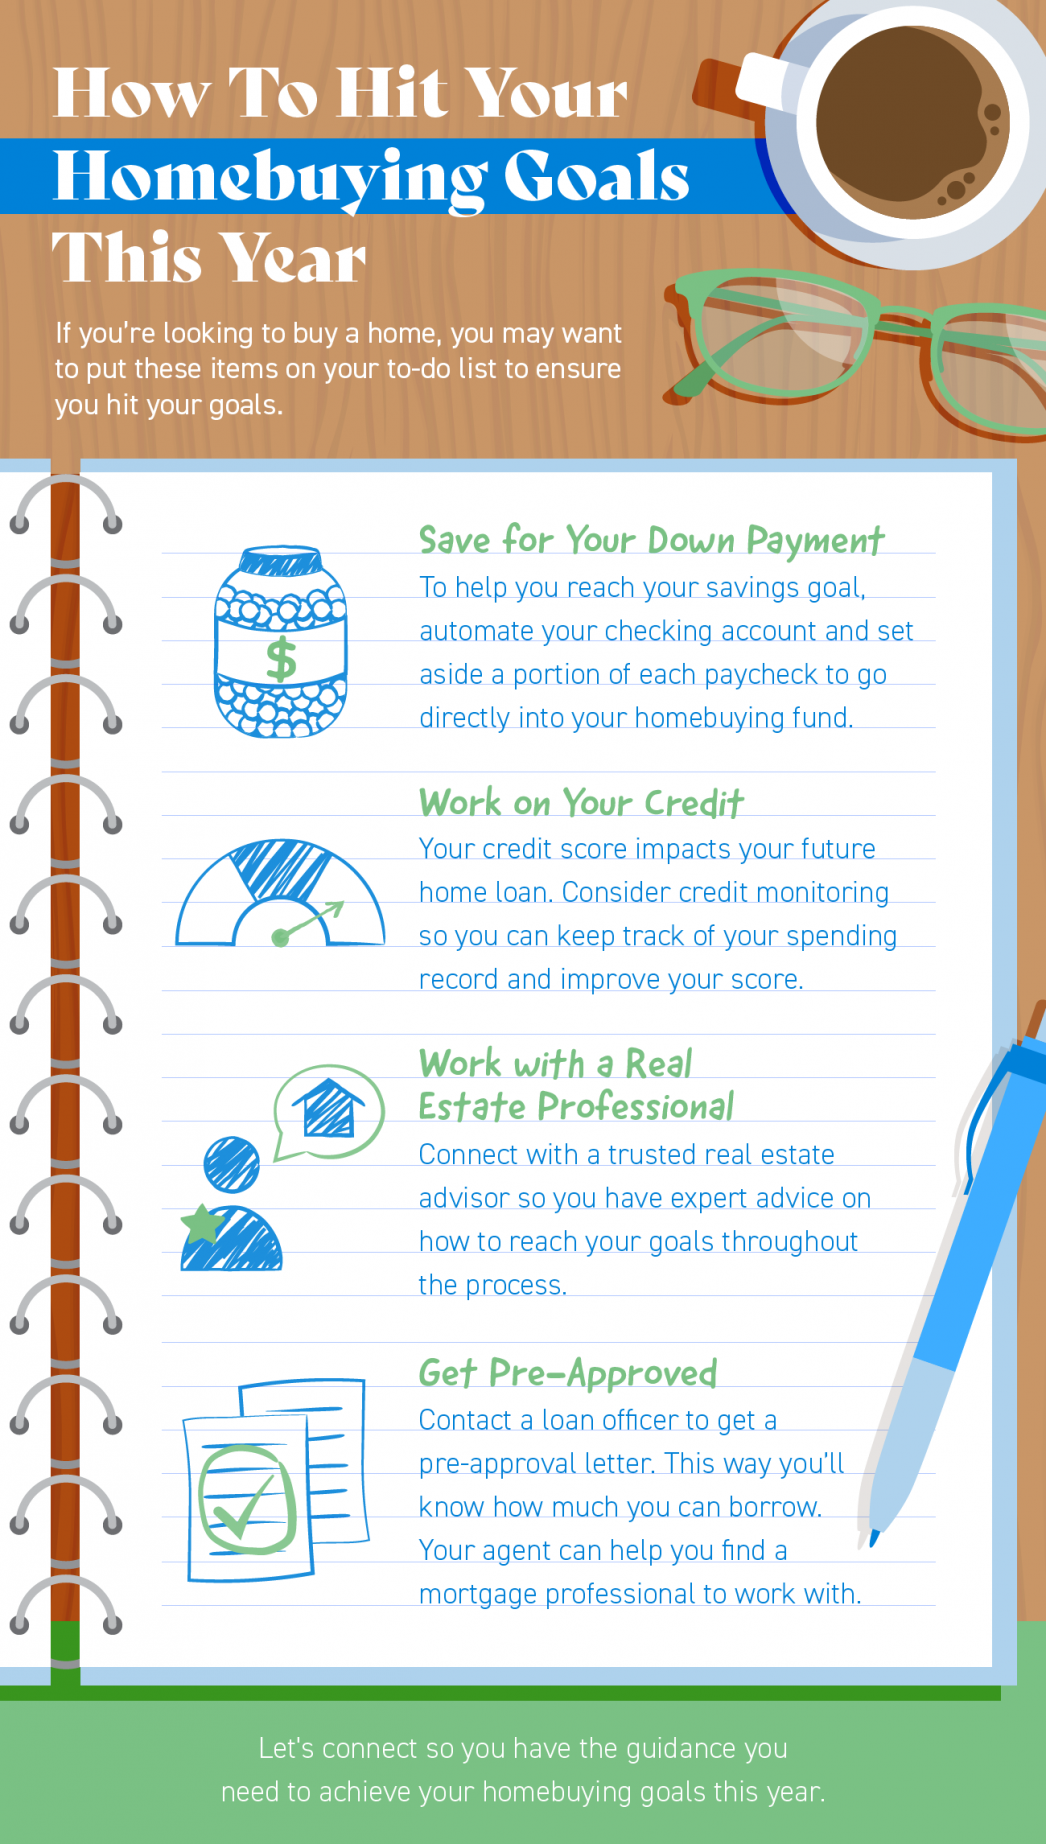 How To Hit Your Homebuying Goals This Year [INFOGRAPHIC] | MyKCM